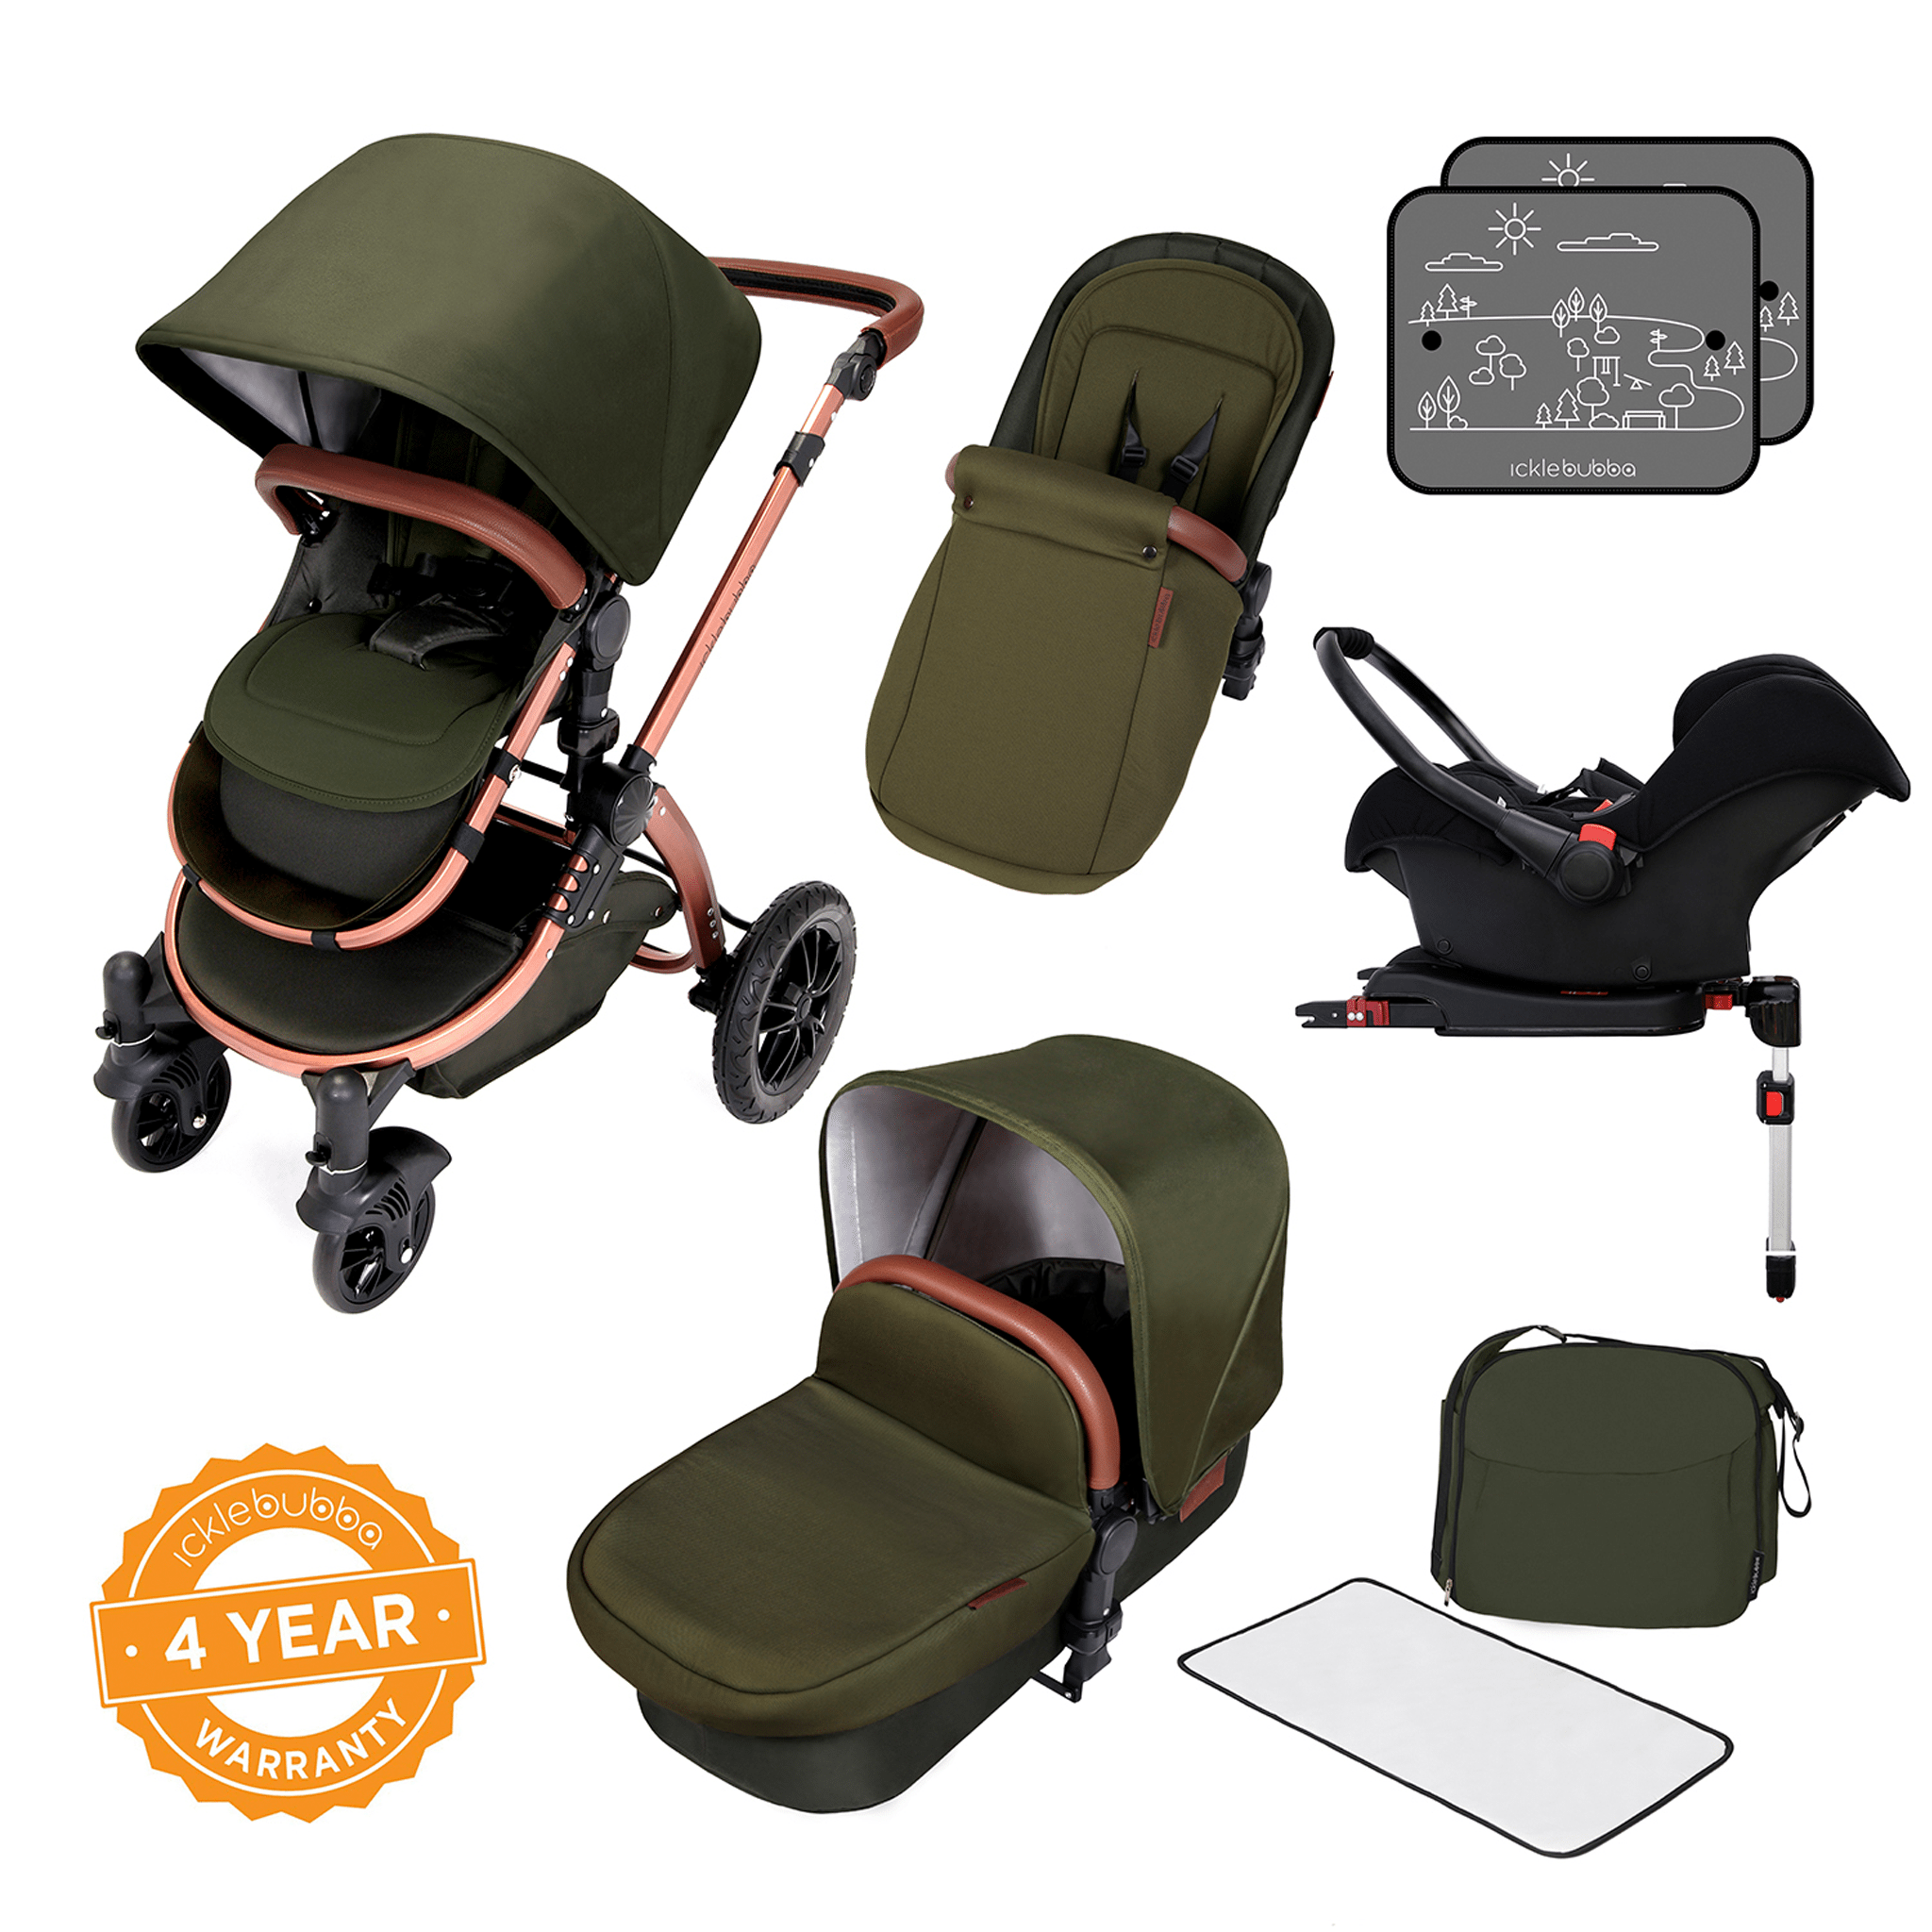 Ickle Bubba travel systems Ickle Bubba Stomp V4 Galaxy Travel System With Base Bronze/Woodland 10-004-200-022